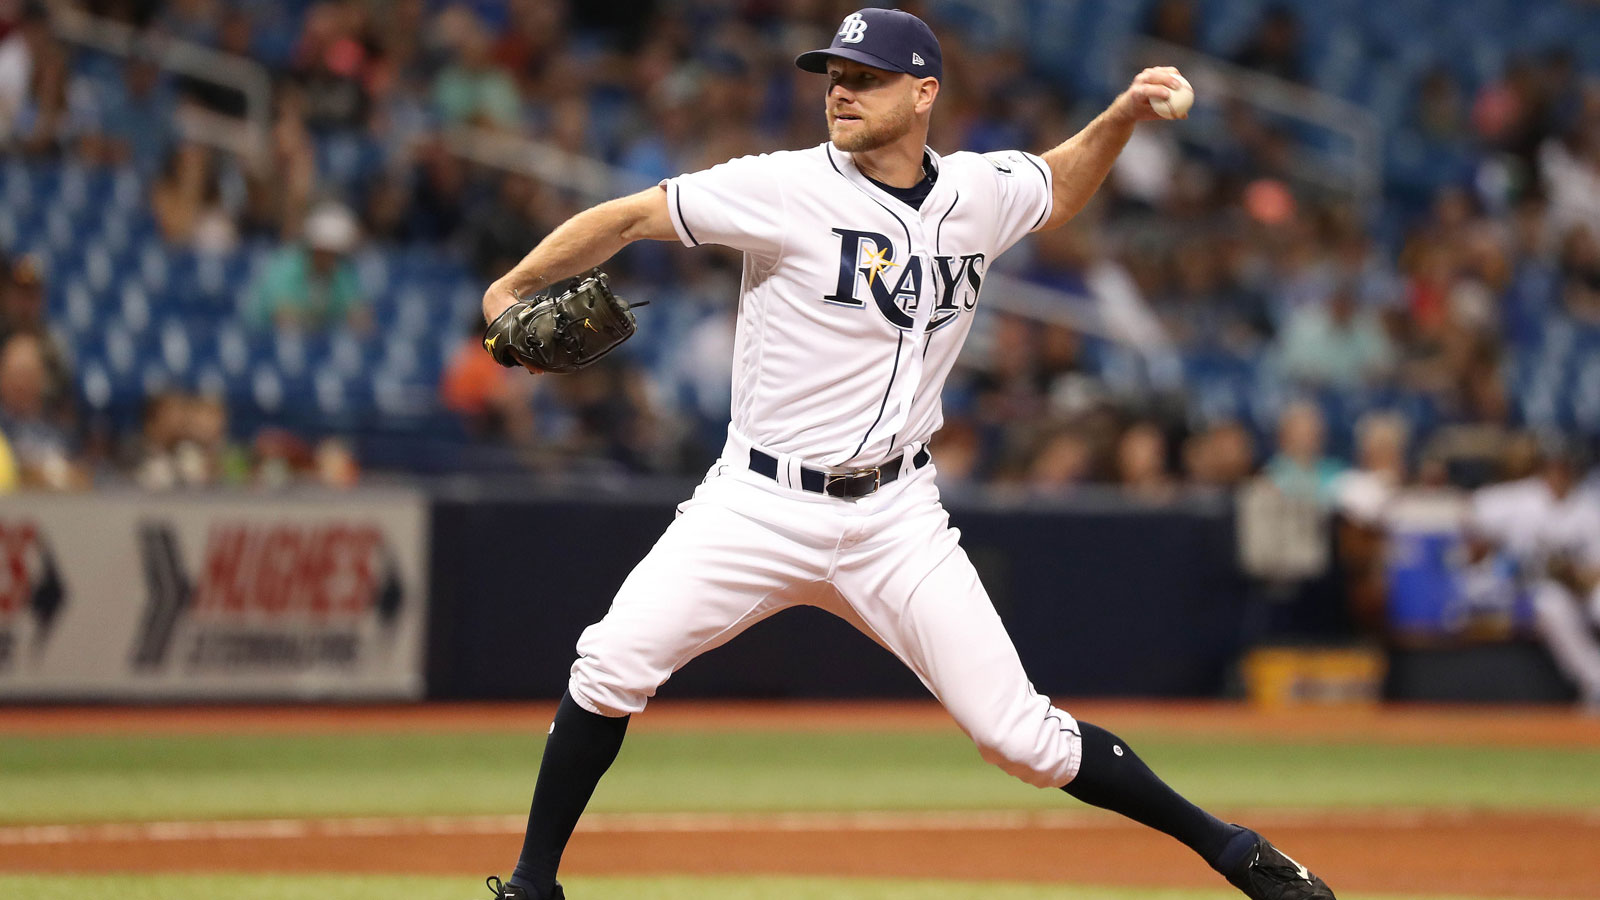 Rays trade LHP Jonny Venters back to the Braves for international signing slot